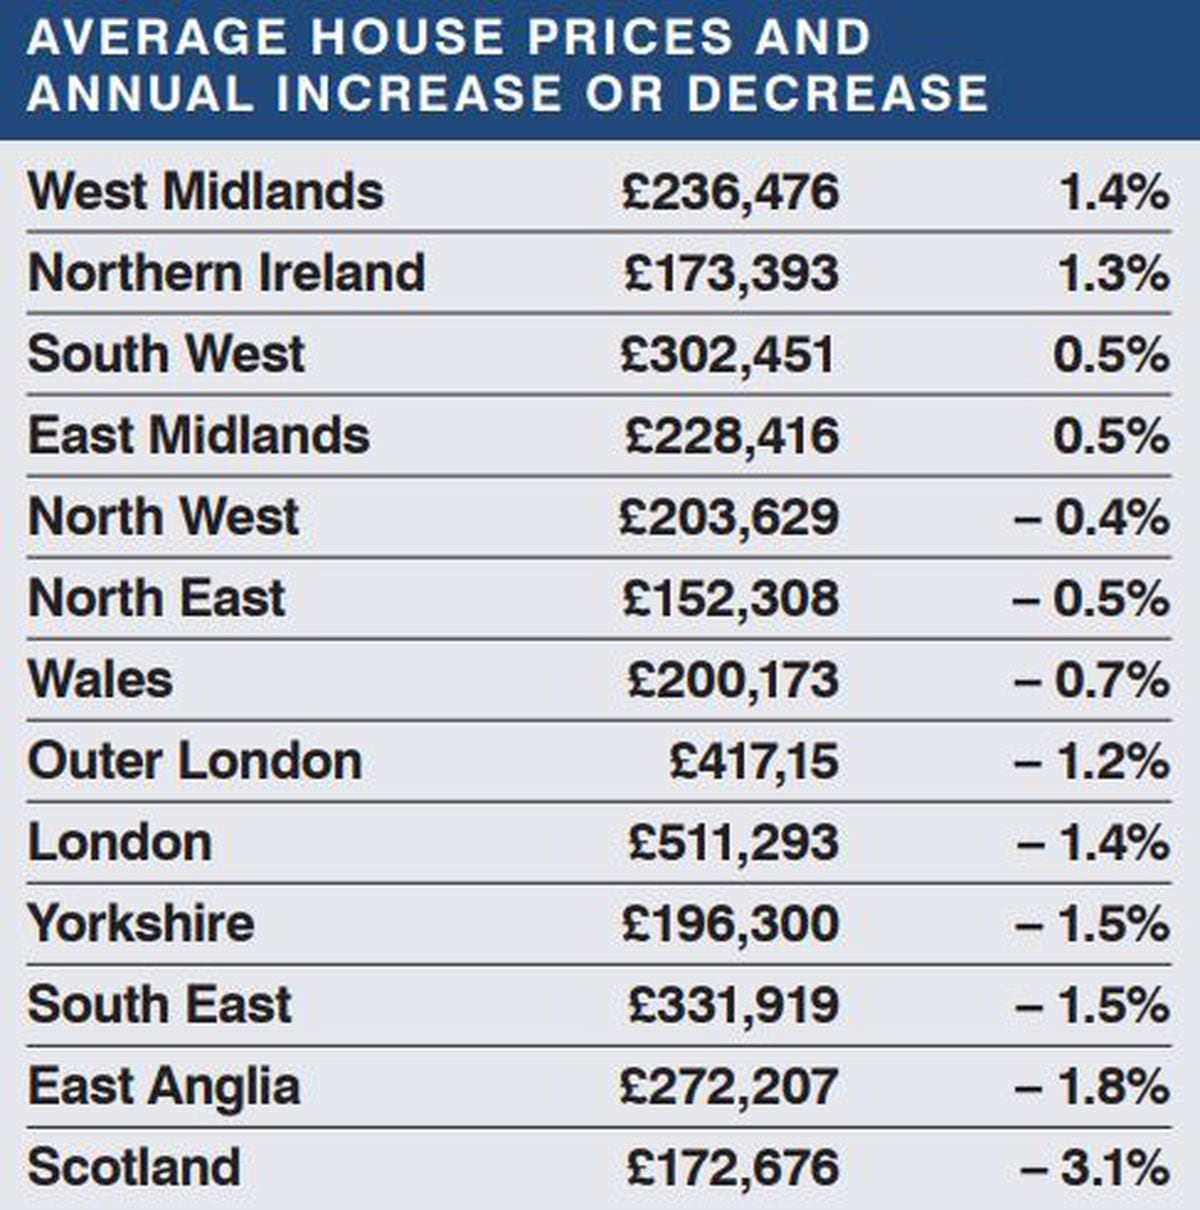 Average changes in house prices around the country